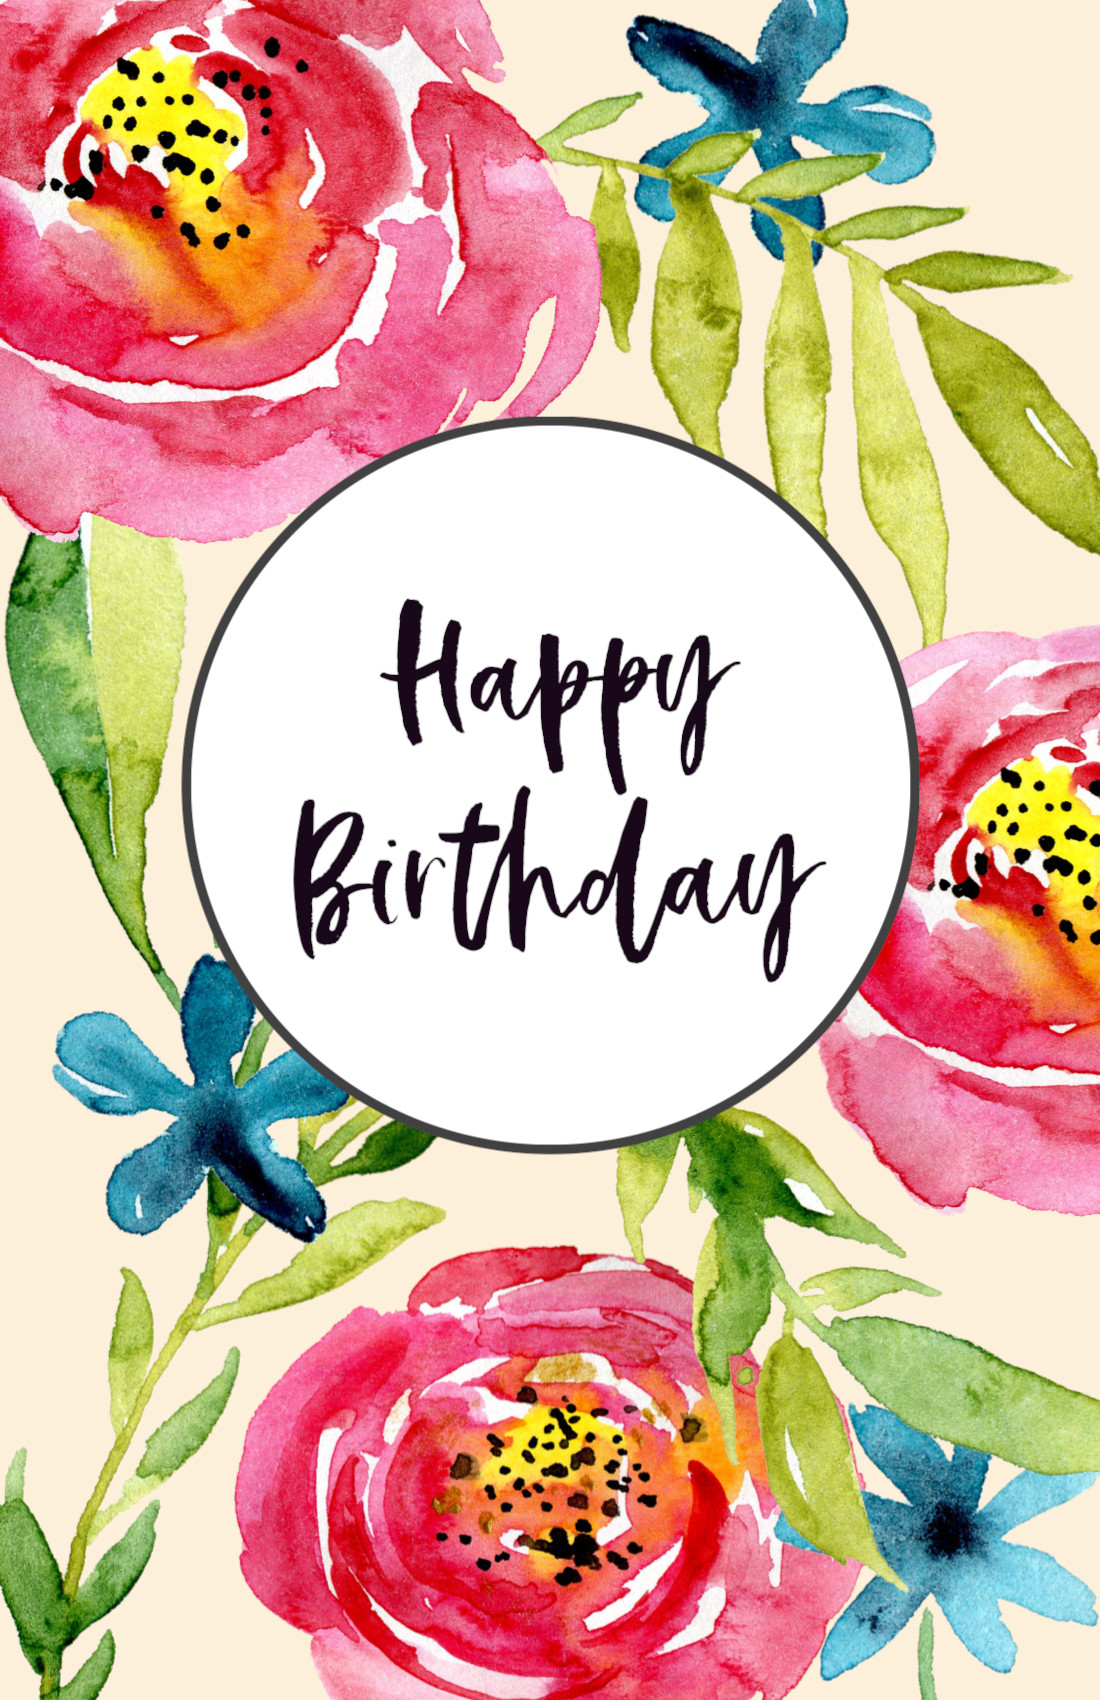 Free Birthday Greeting Cards
 Free Printable Birthday Cards Paper Trail Design